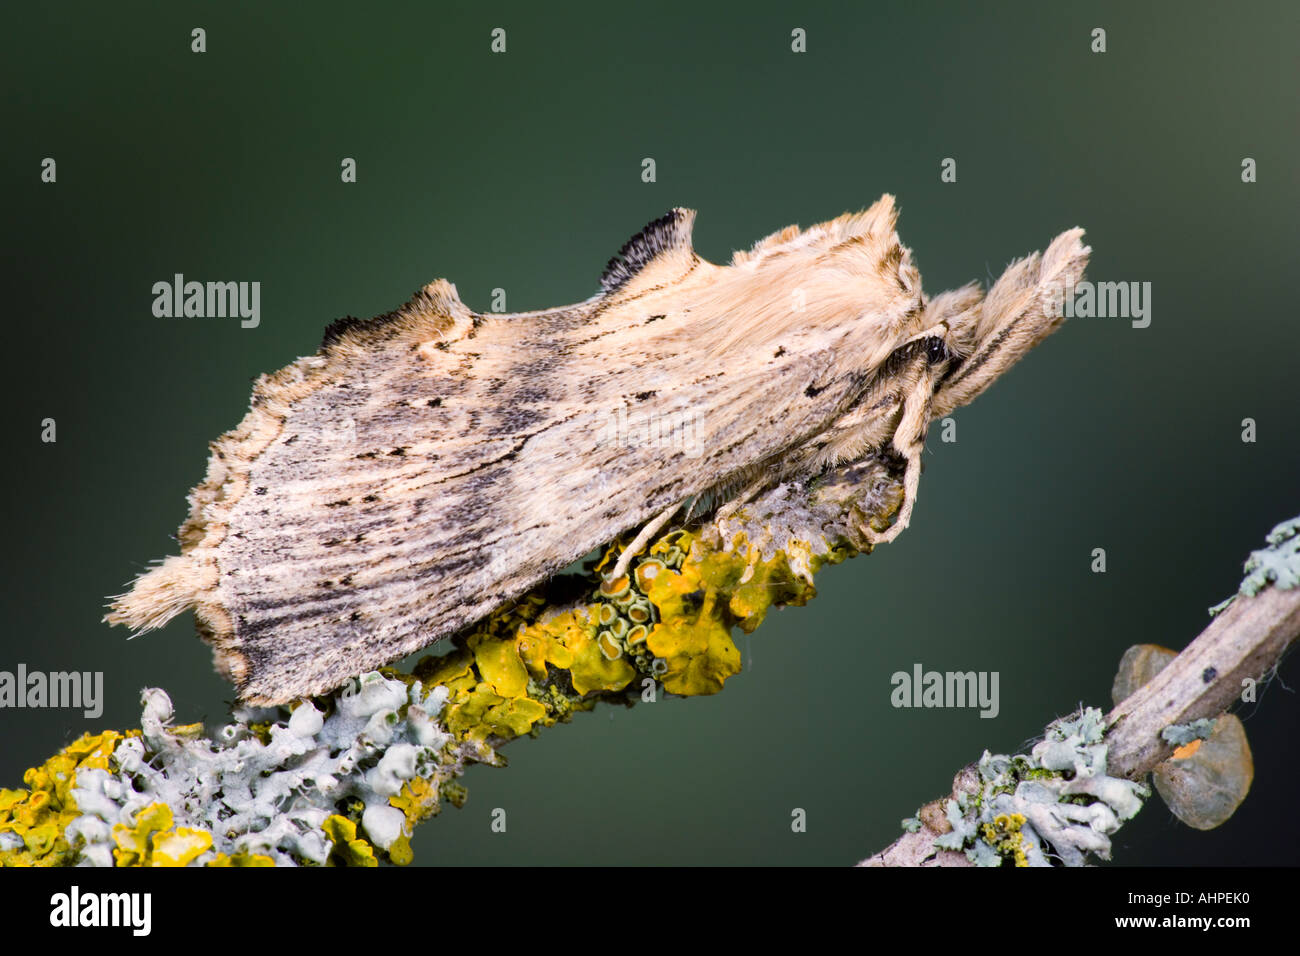 Pale Prominent Pterostoma palpina on Elder twig showing markings and detail Potton Bedfordshire Stock Photo